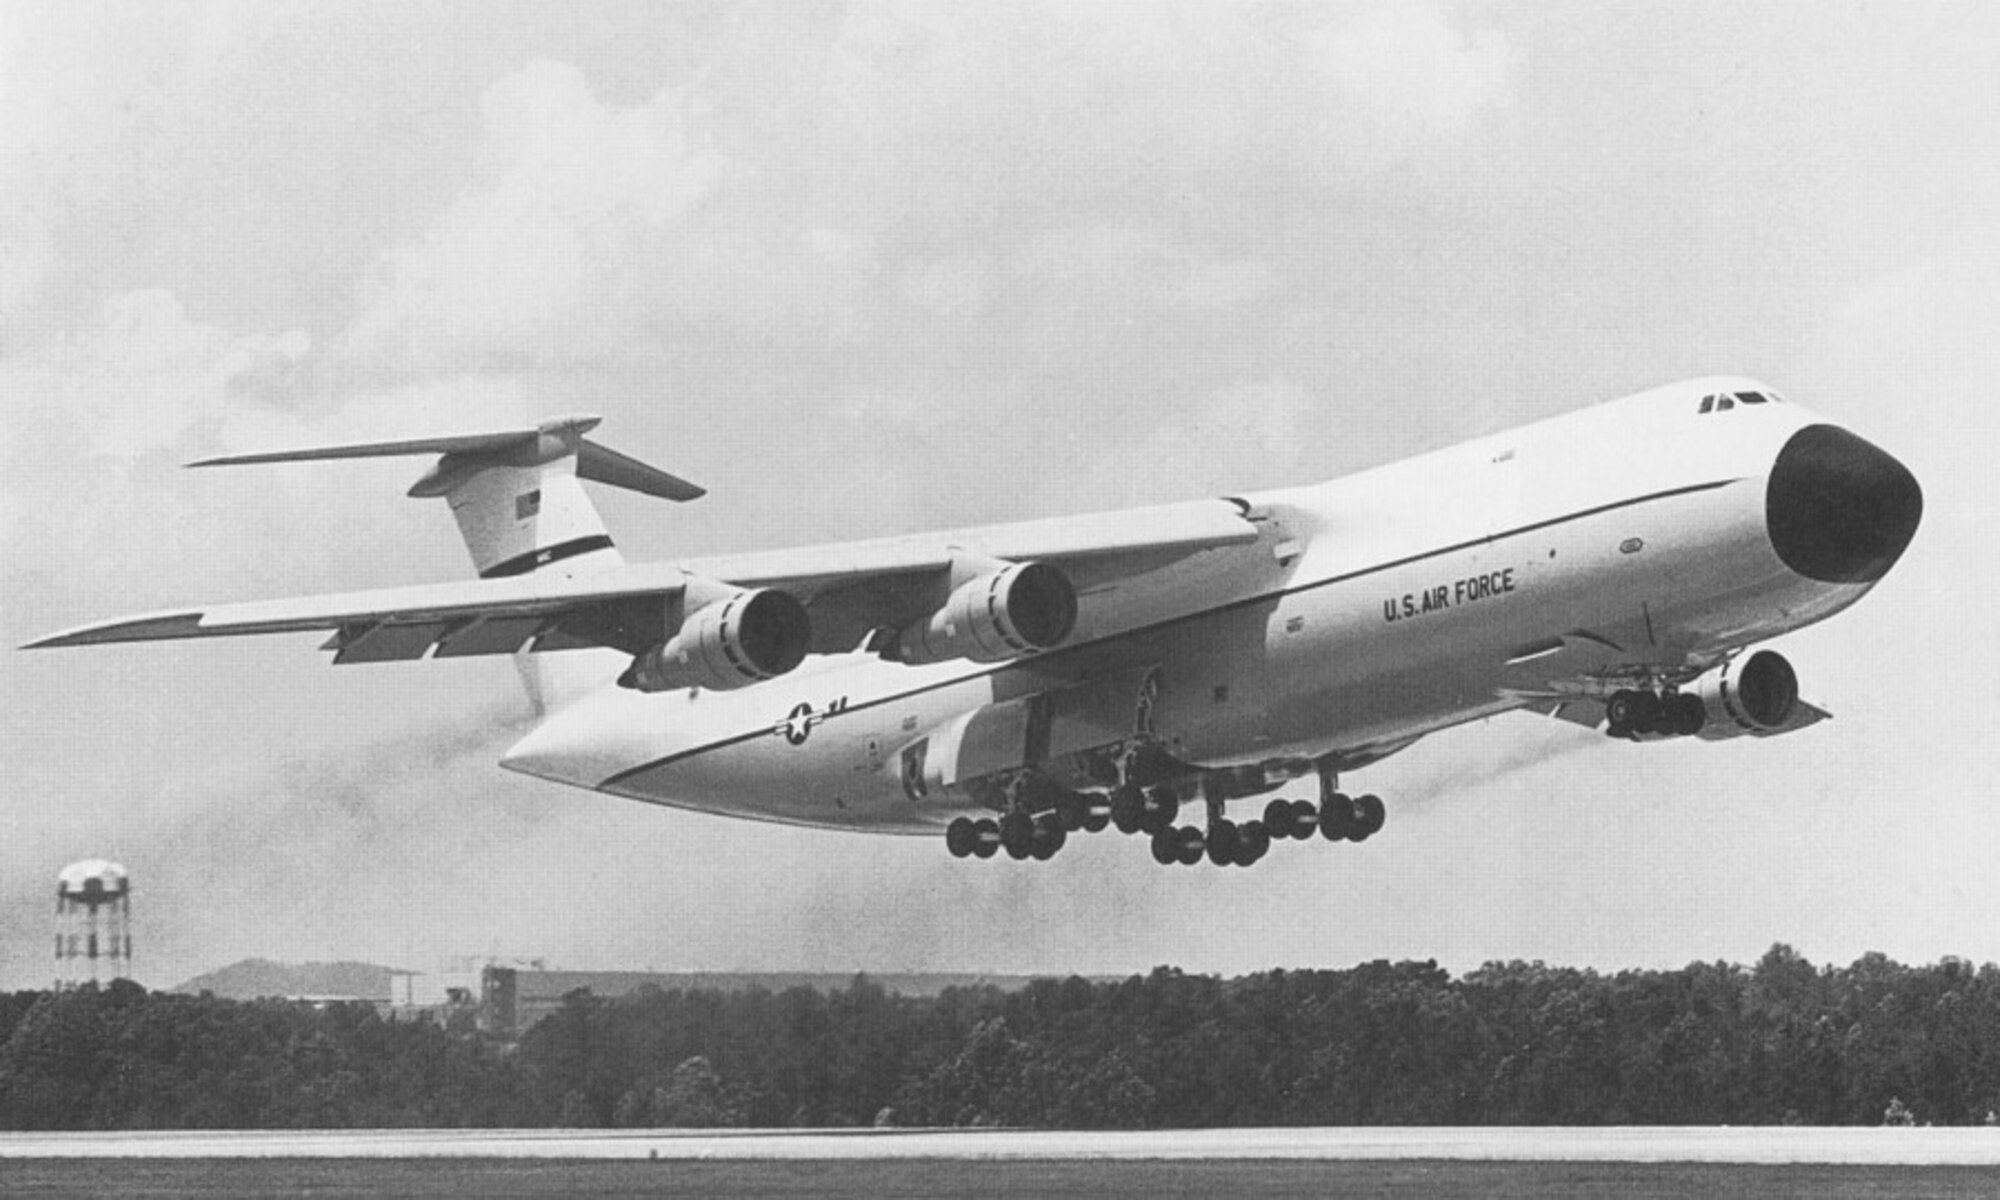 This massive aircraft is designed for strategic airlift and is capable of transporting anything that the Army operates.  The C-5 Galaxy was only with the 3-1-5 for a very short time in the early 1970s, but it continues to provide crucial airlift capabilities today.  The C-5 can carry 270 troops and has a maximum payload of 240,000 pounds.  (USAF Historical Photo)    